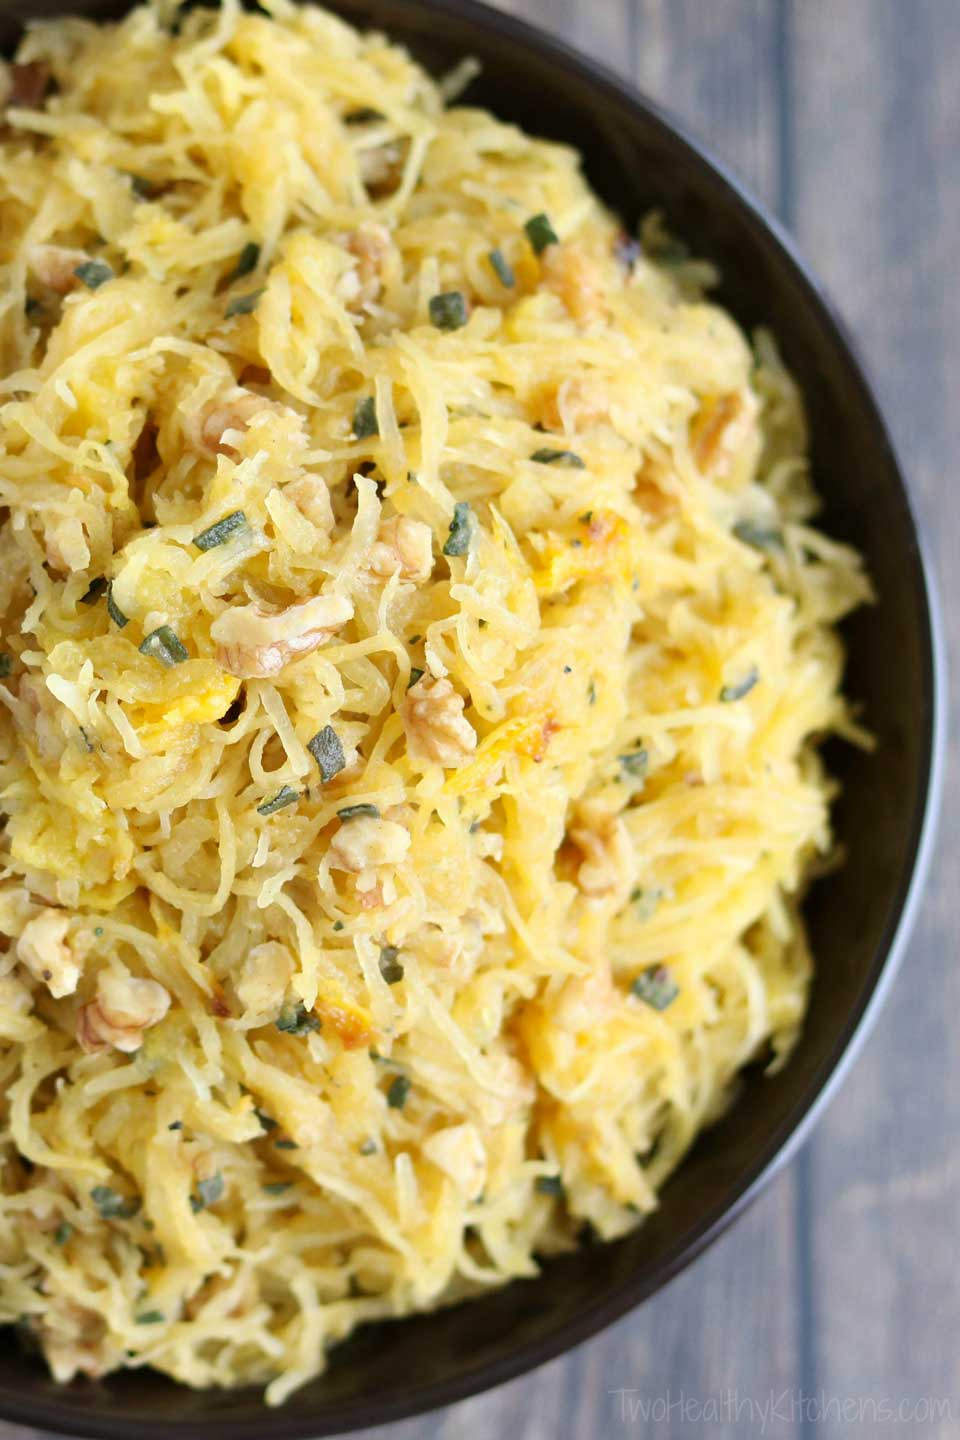 Microwave Spaghetti Squash
 Microwave Spaghetti Squash with Sage Browned Butter and